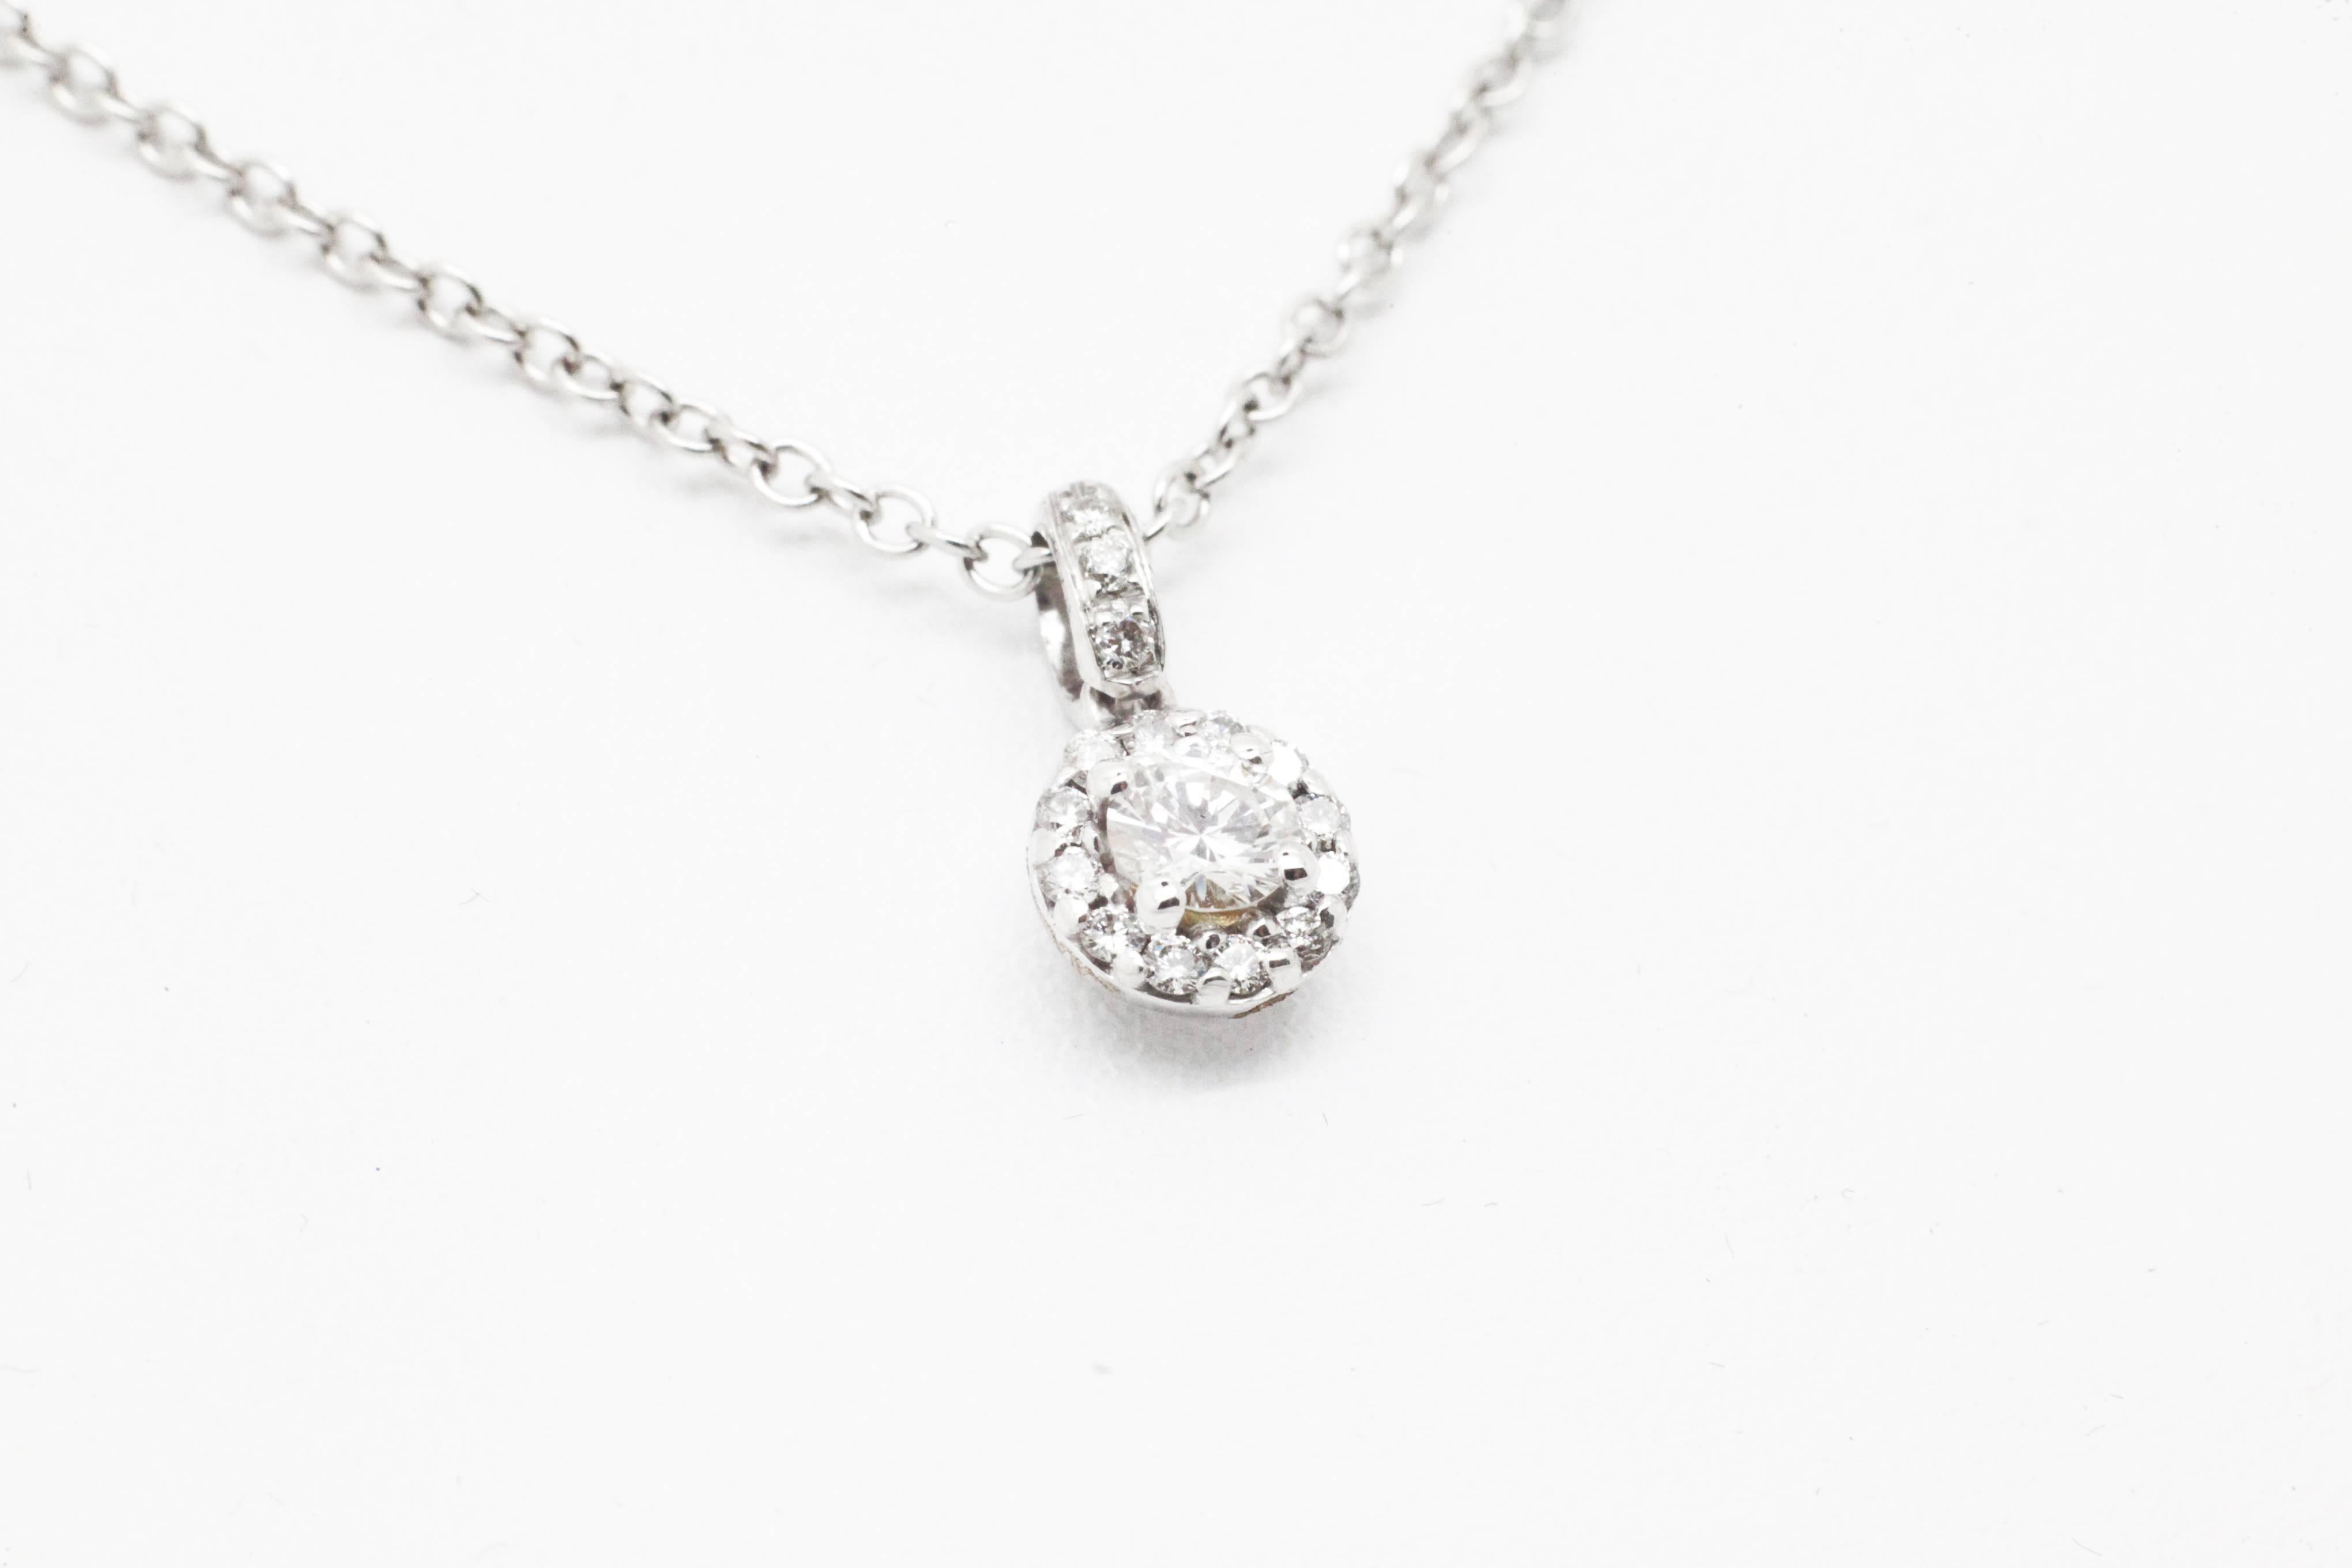 Ferrucci white diamond pendant embraced by diamond halo, the classic of fine jewelry for a fine elegant neck, Made in Italy
Entirely made in 18k white gold

Diamond total carat weight 0.26